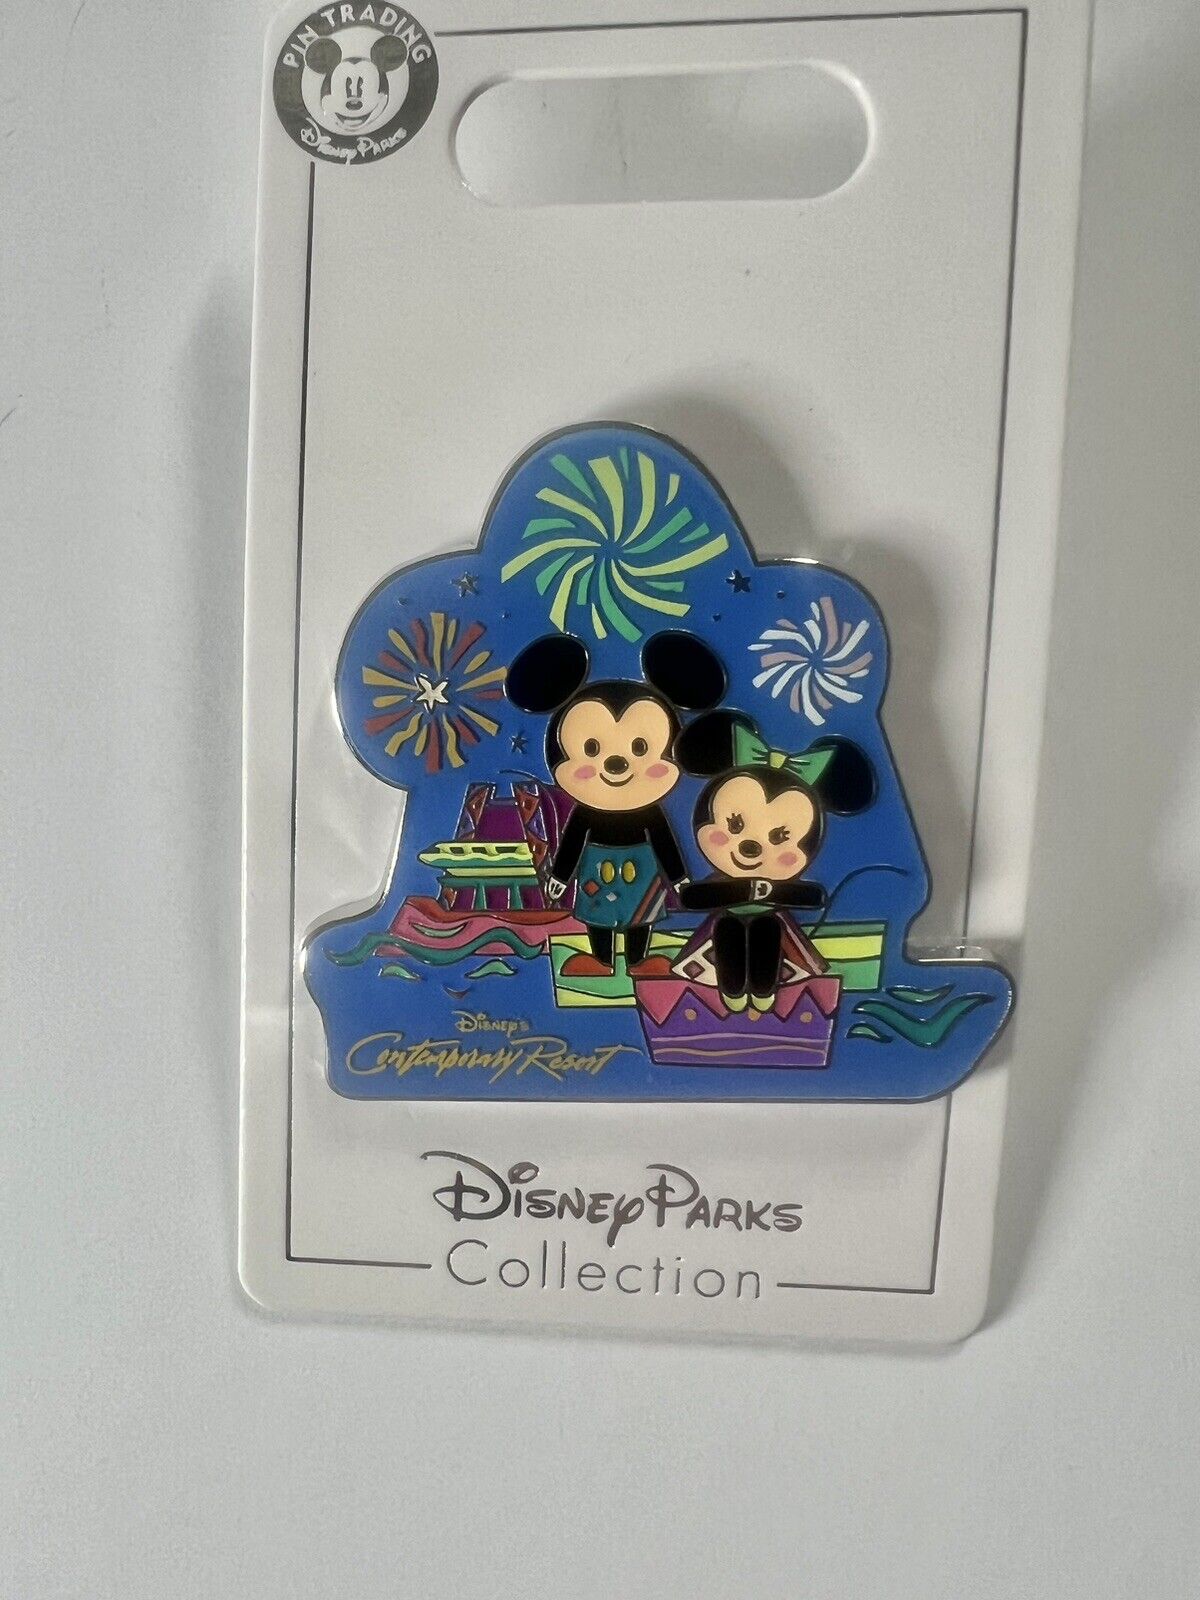 2022 Disney Parks Contemporary Resort Mickey & Minnie Mouse Open Edition OE Pin